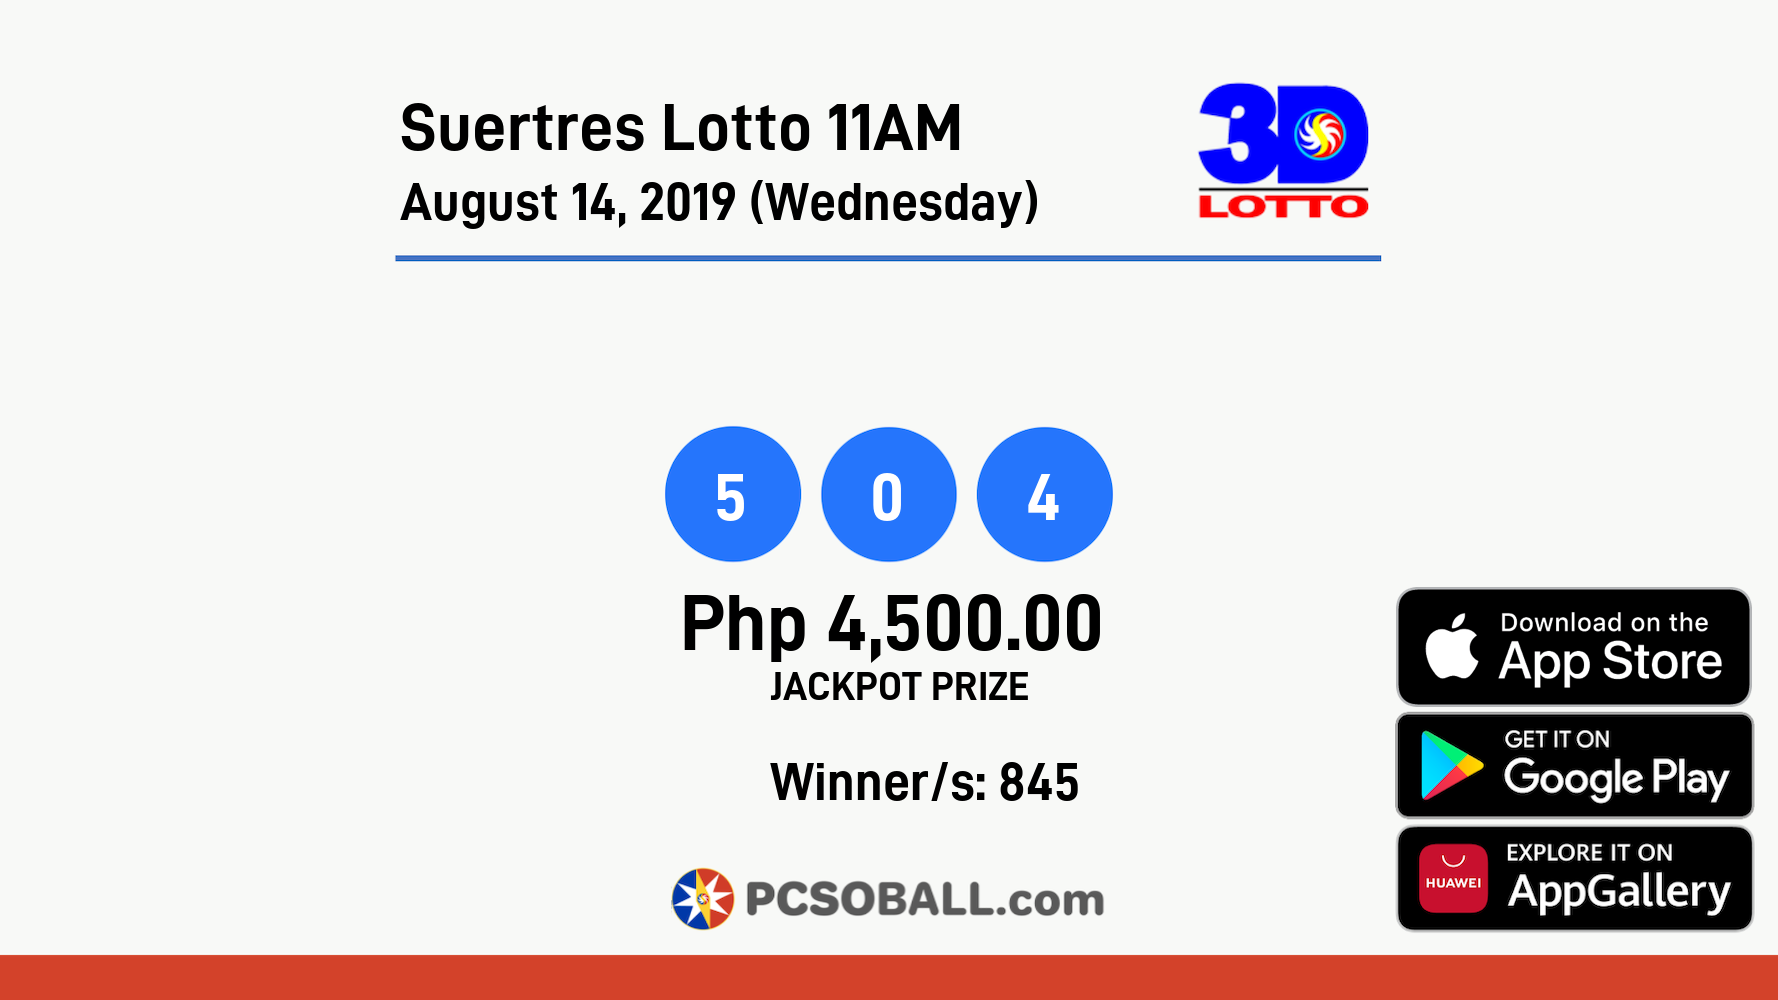 Suertres Lotto 11AM August 14, 2019 (Wednesday) Result